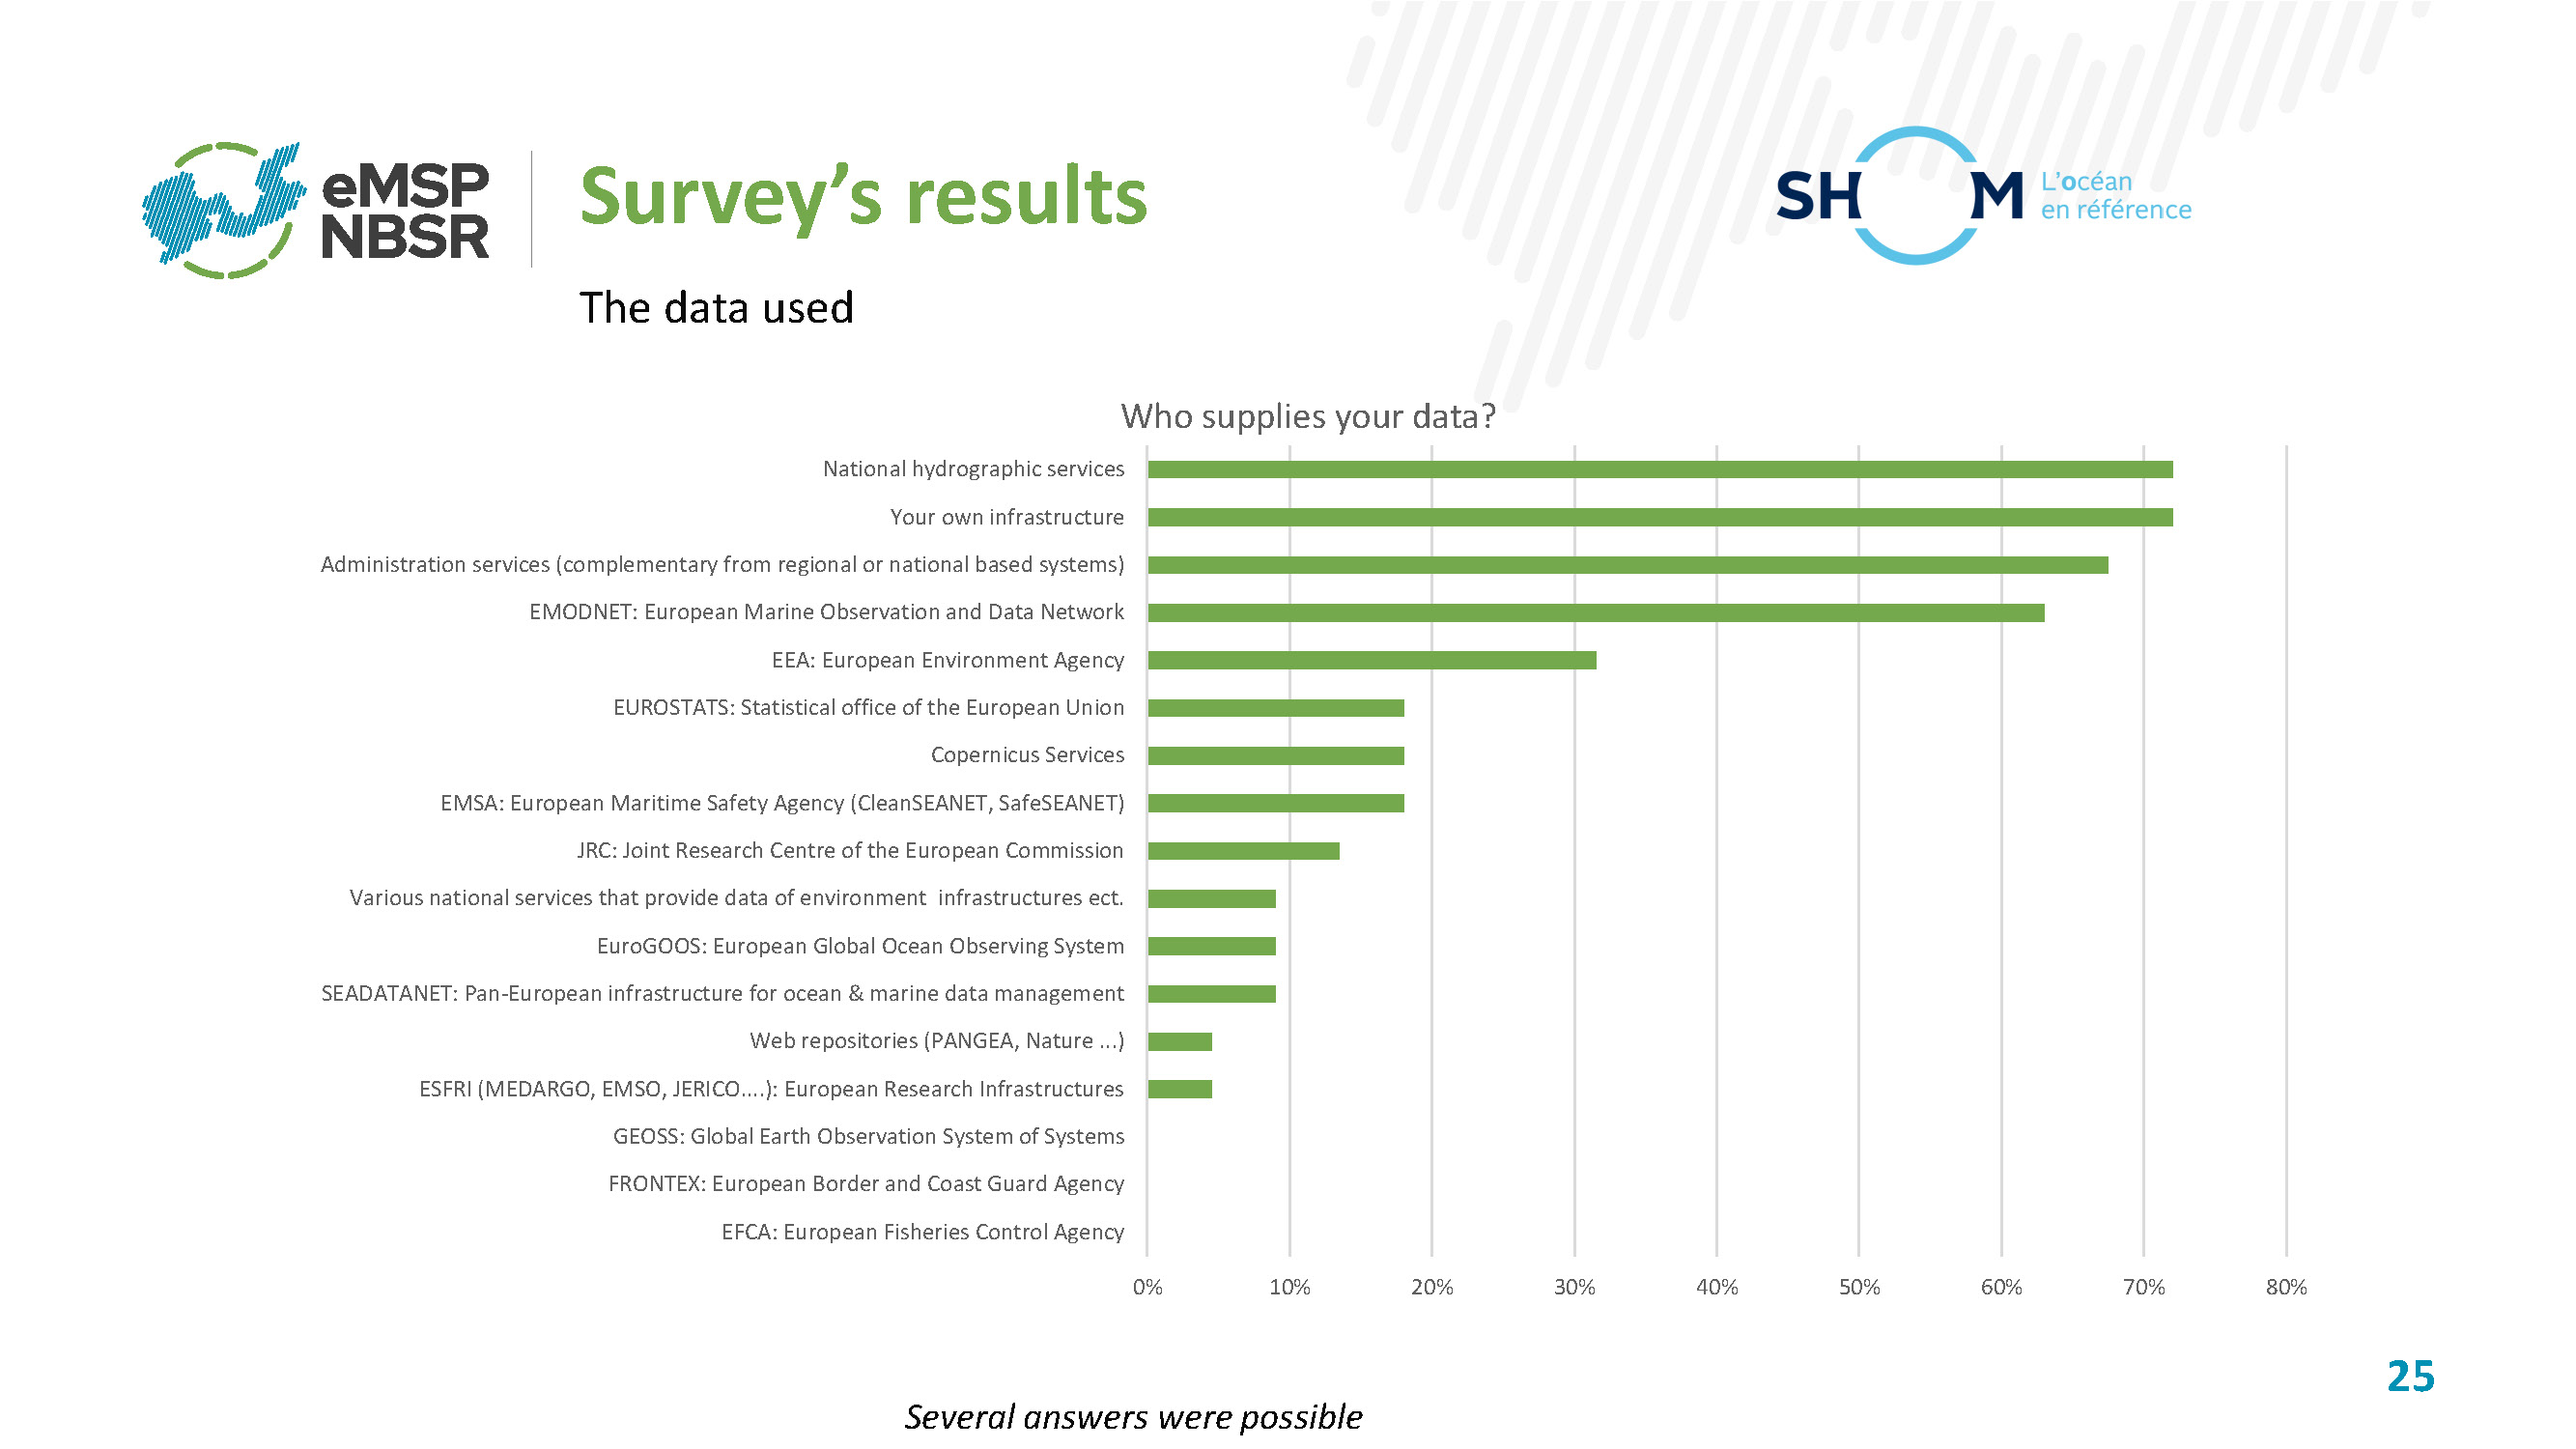 The eMSP NSBR survey launched in February 2022 indicated that EMODnet is used by 63% of the participants.